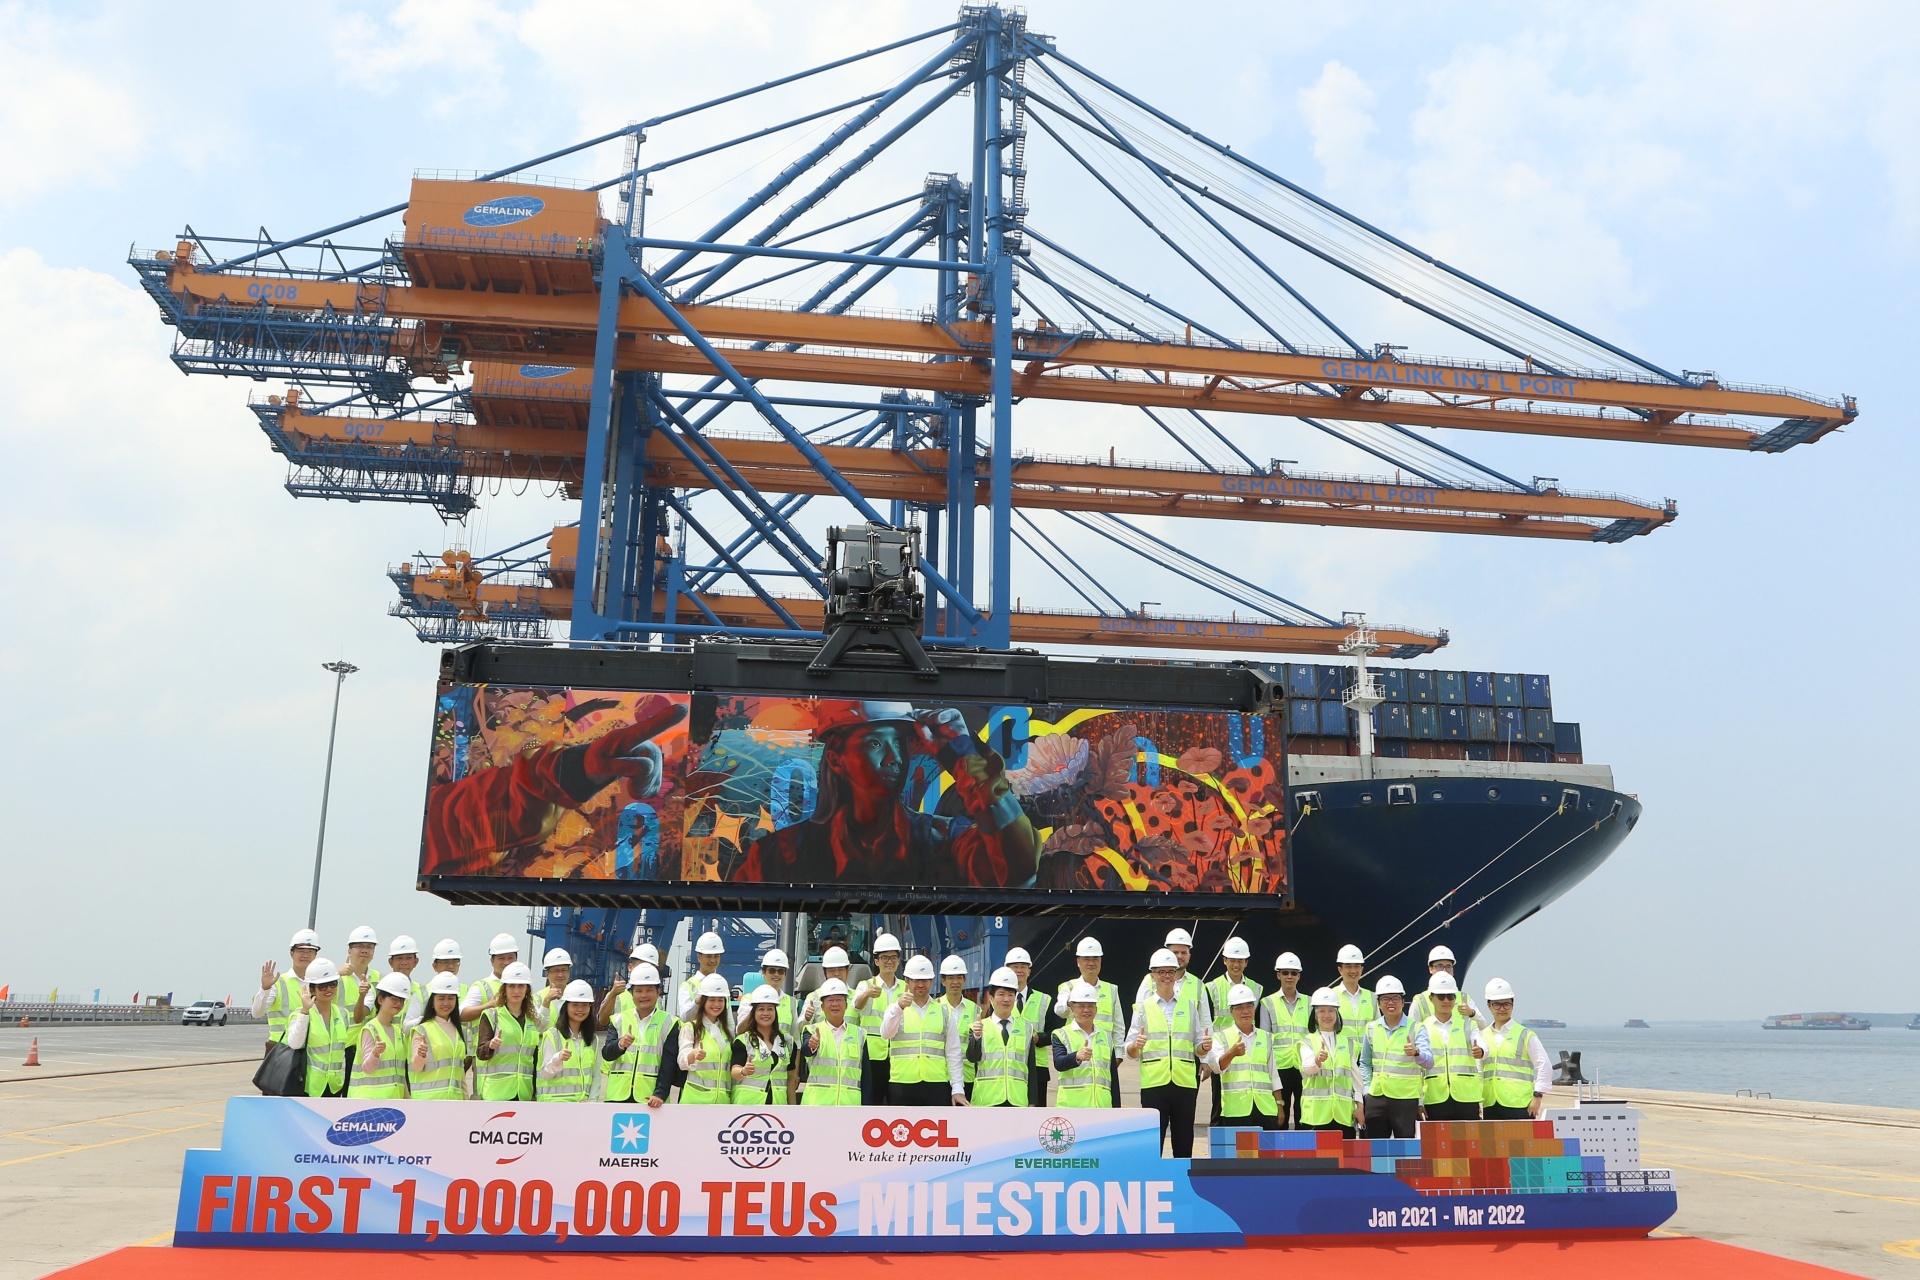 Gemalink Port marks its first million TEUs throughput after one year of operation